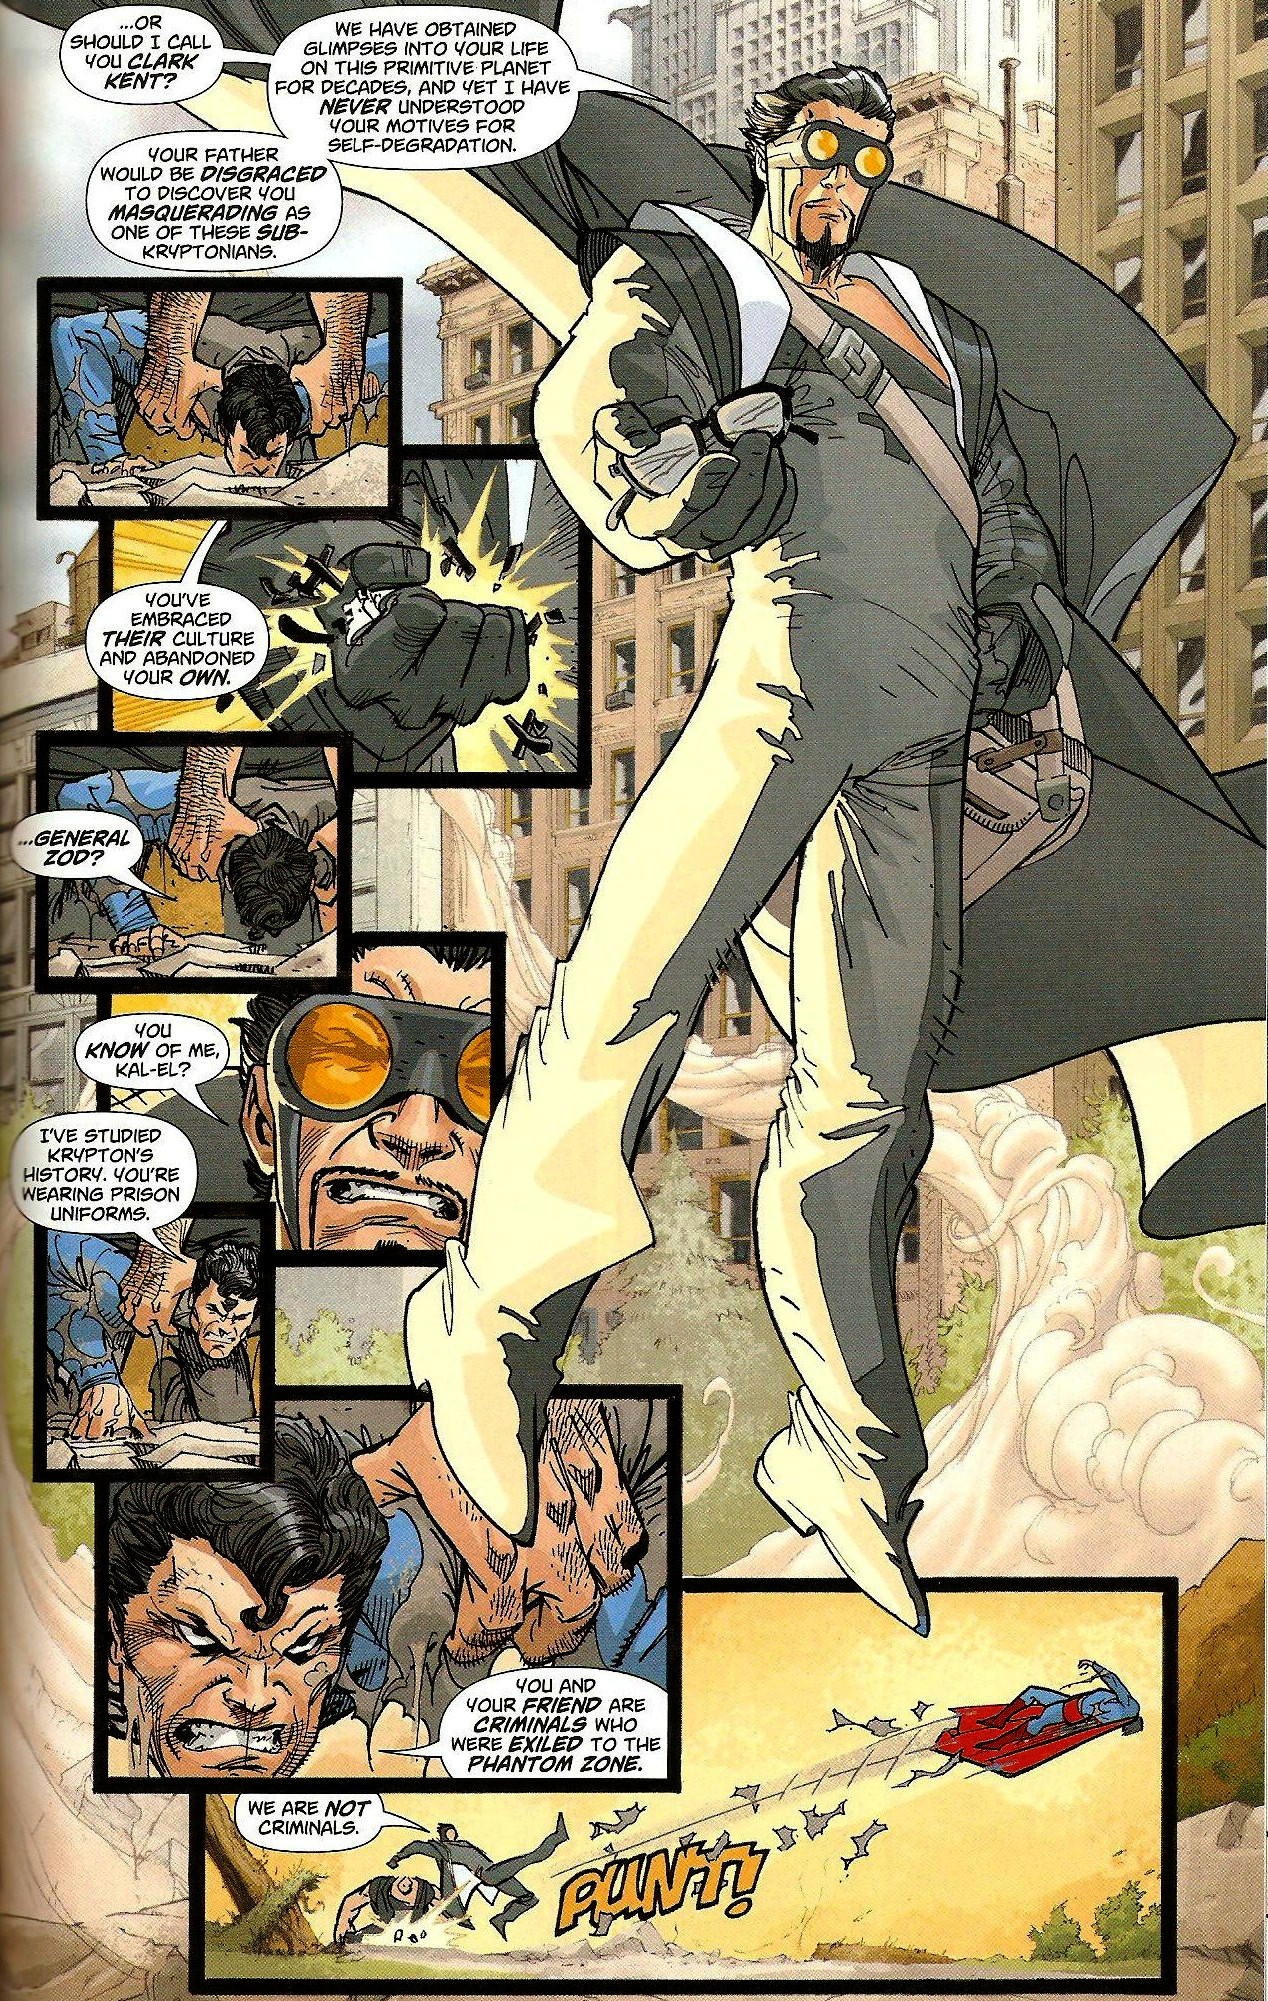 From Action Comics (Vol. 1) #846 (2007)